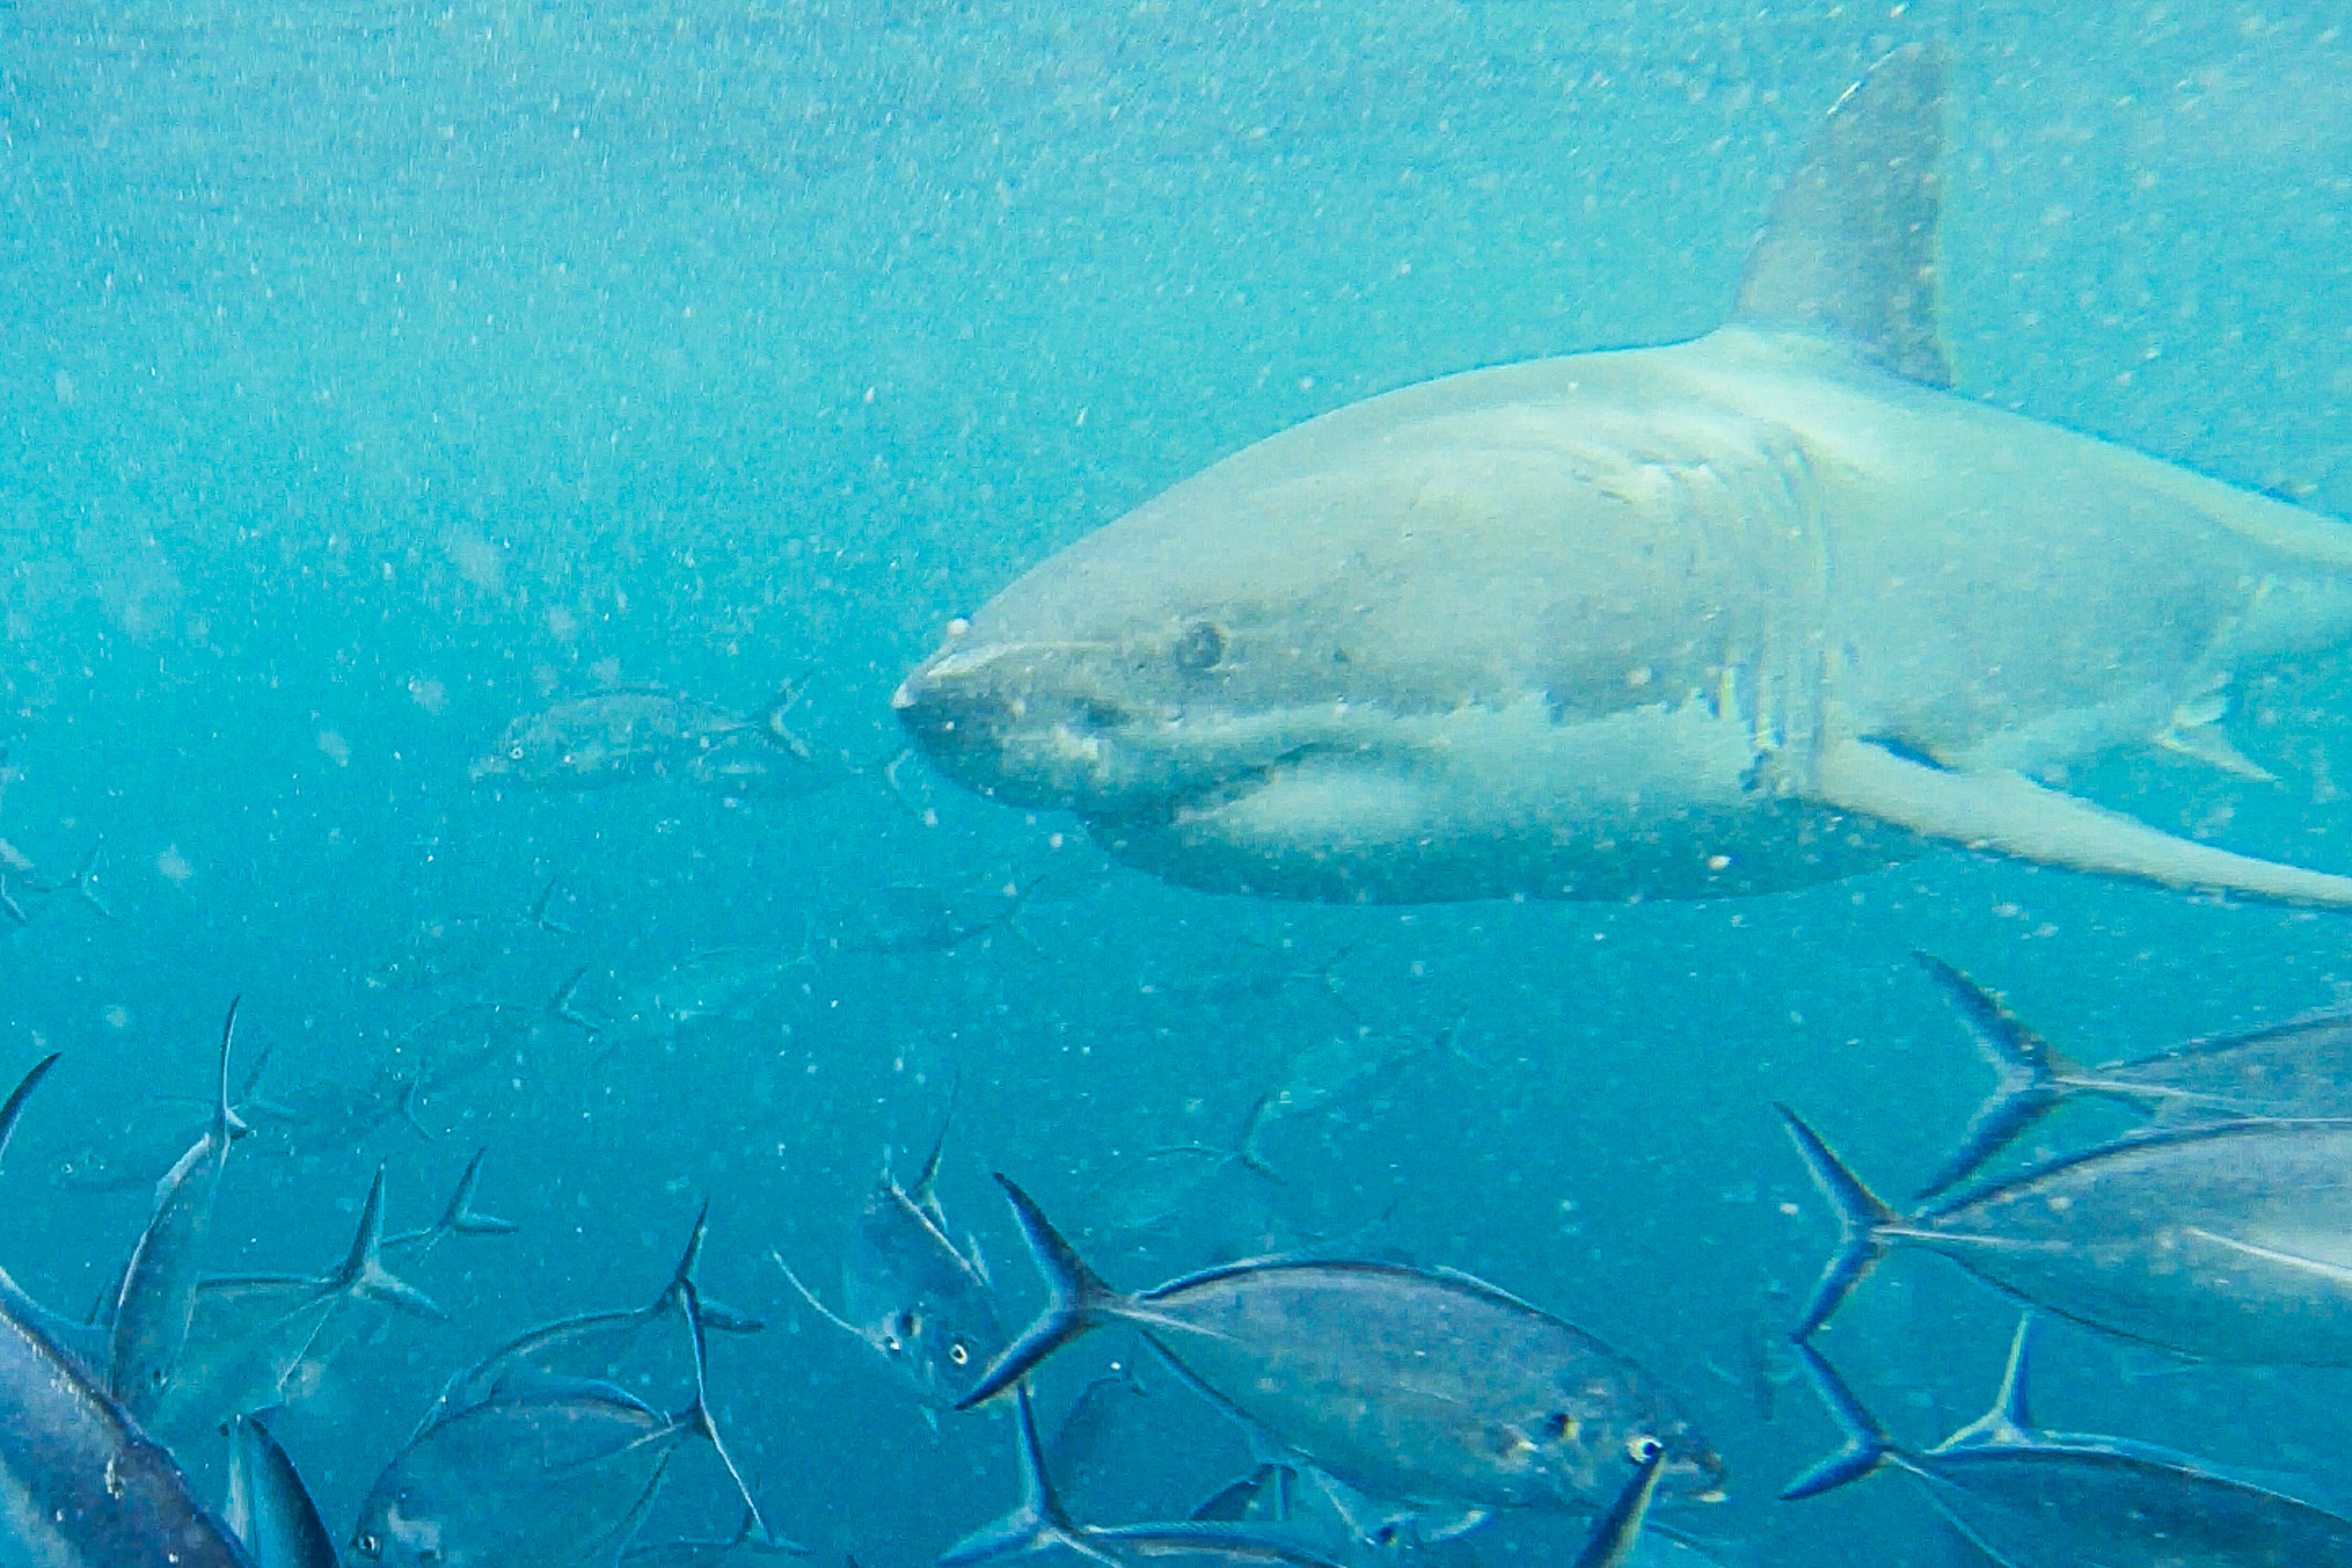 calypso star charters shark cage diving port lincoln